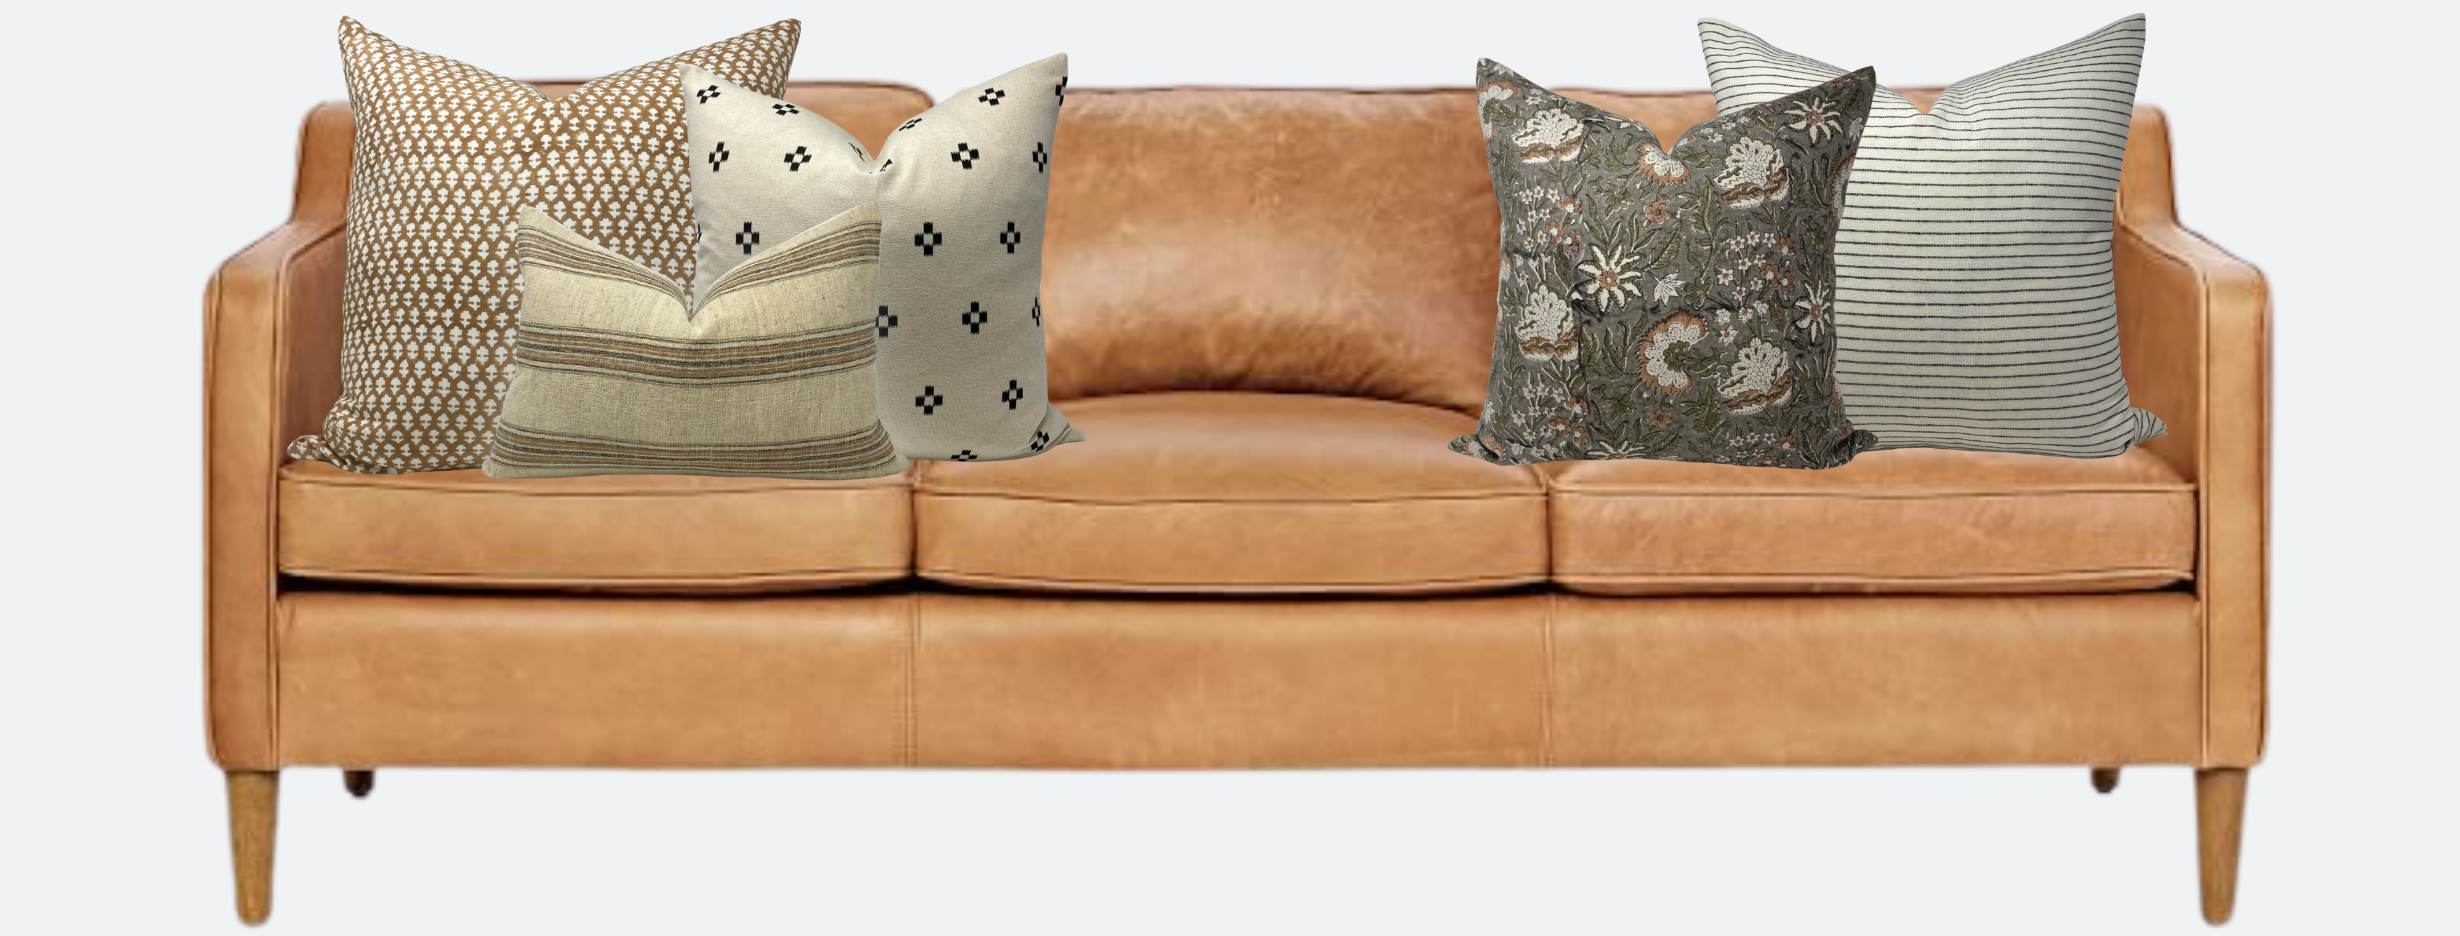 https://cdn.shopify.com/s/files/1/0052/8780/5039/files/Everand_Desert_Hues_camel_leather_couch.png?v=1661446780